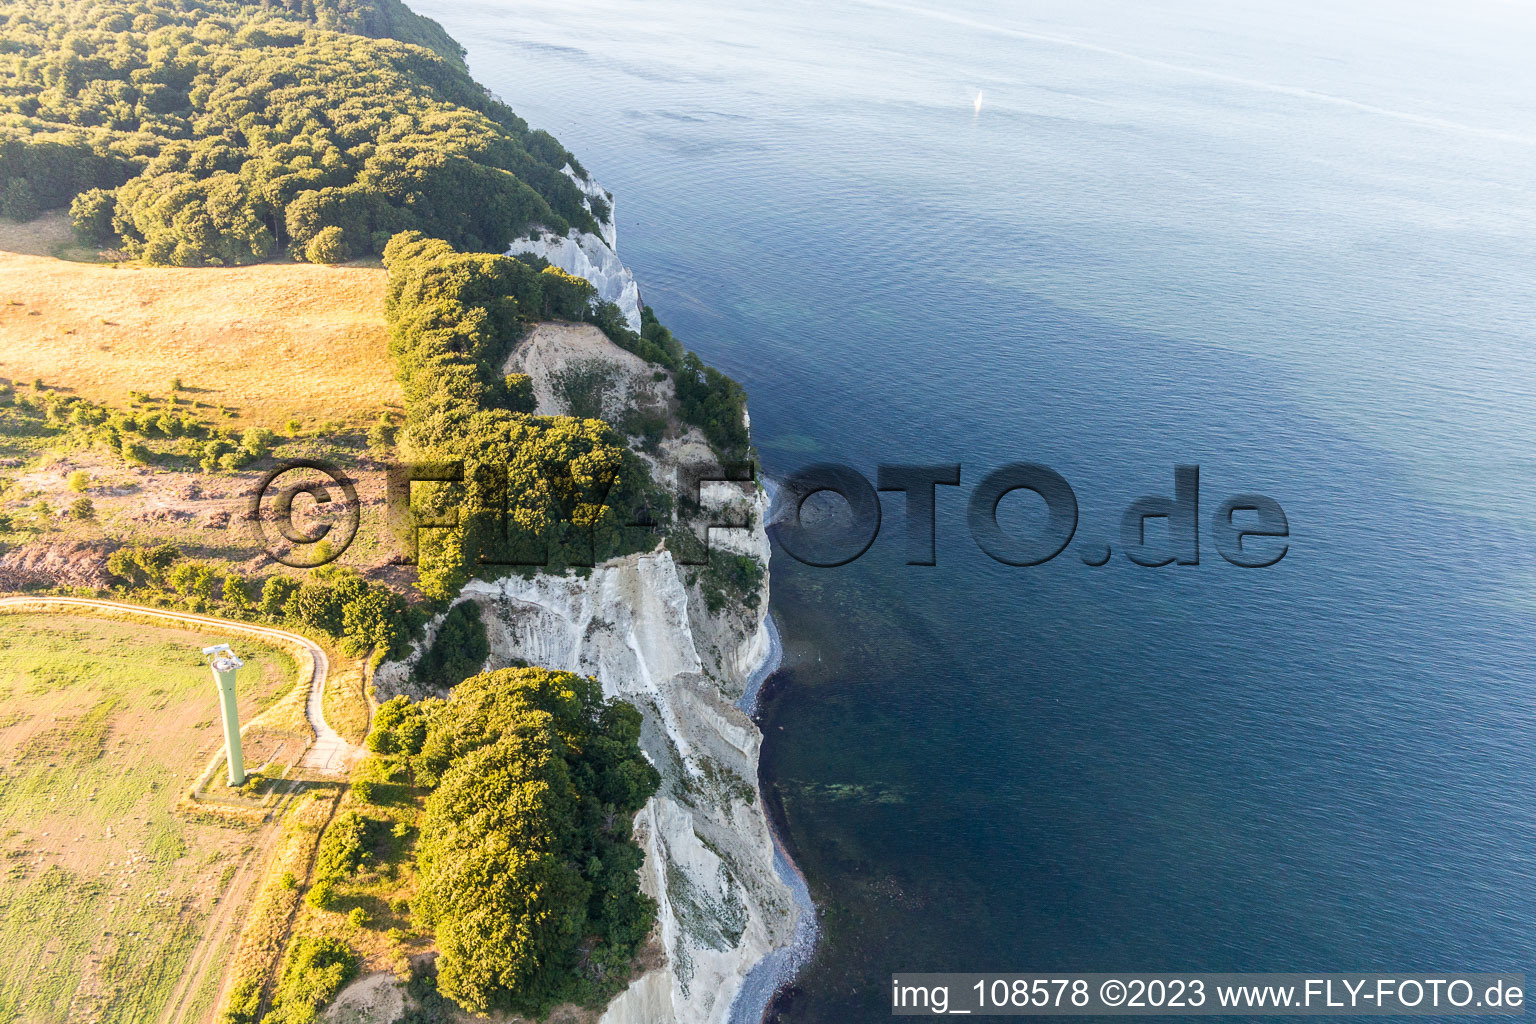 Borre in the state Zealand, Denmark from above